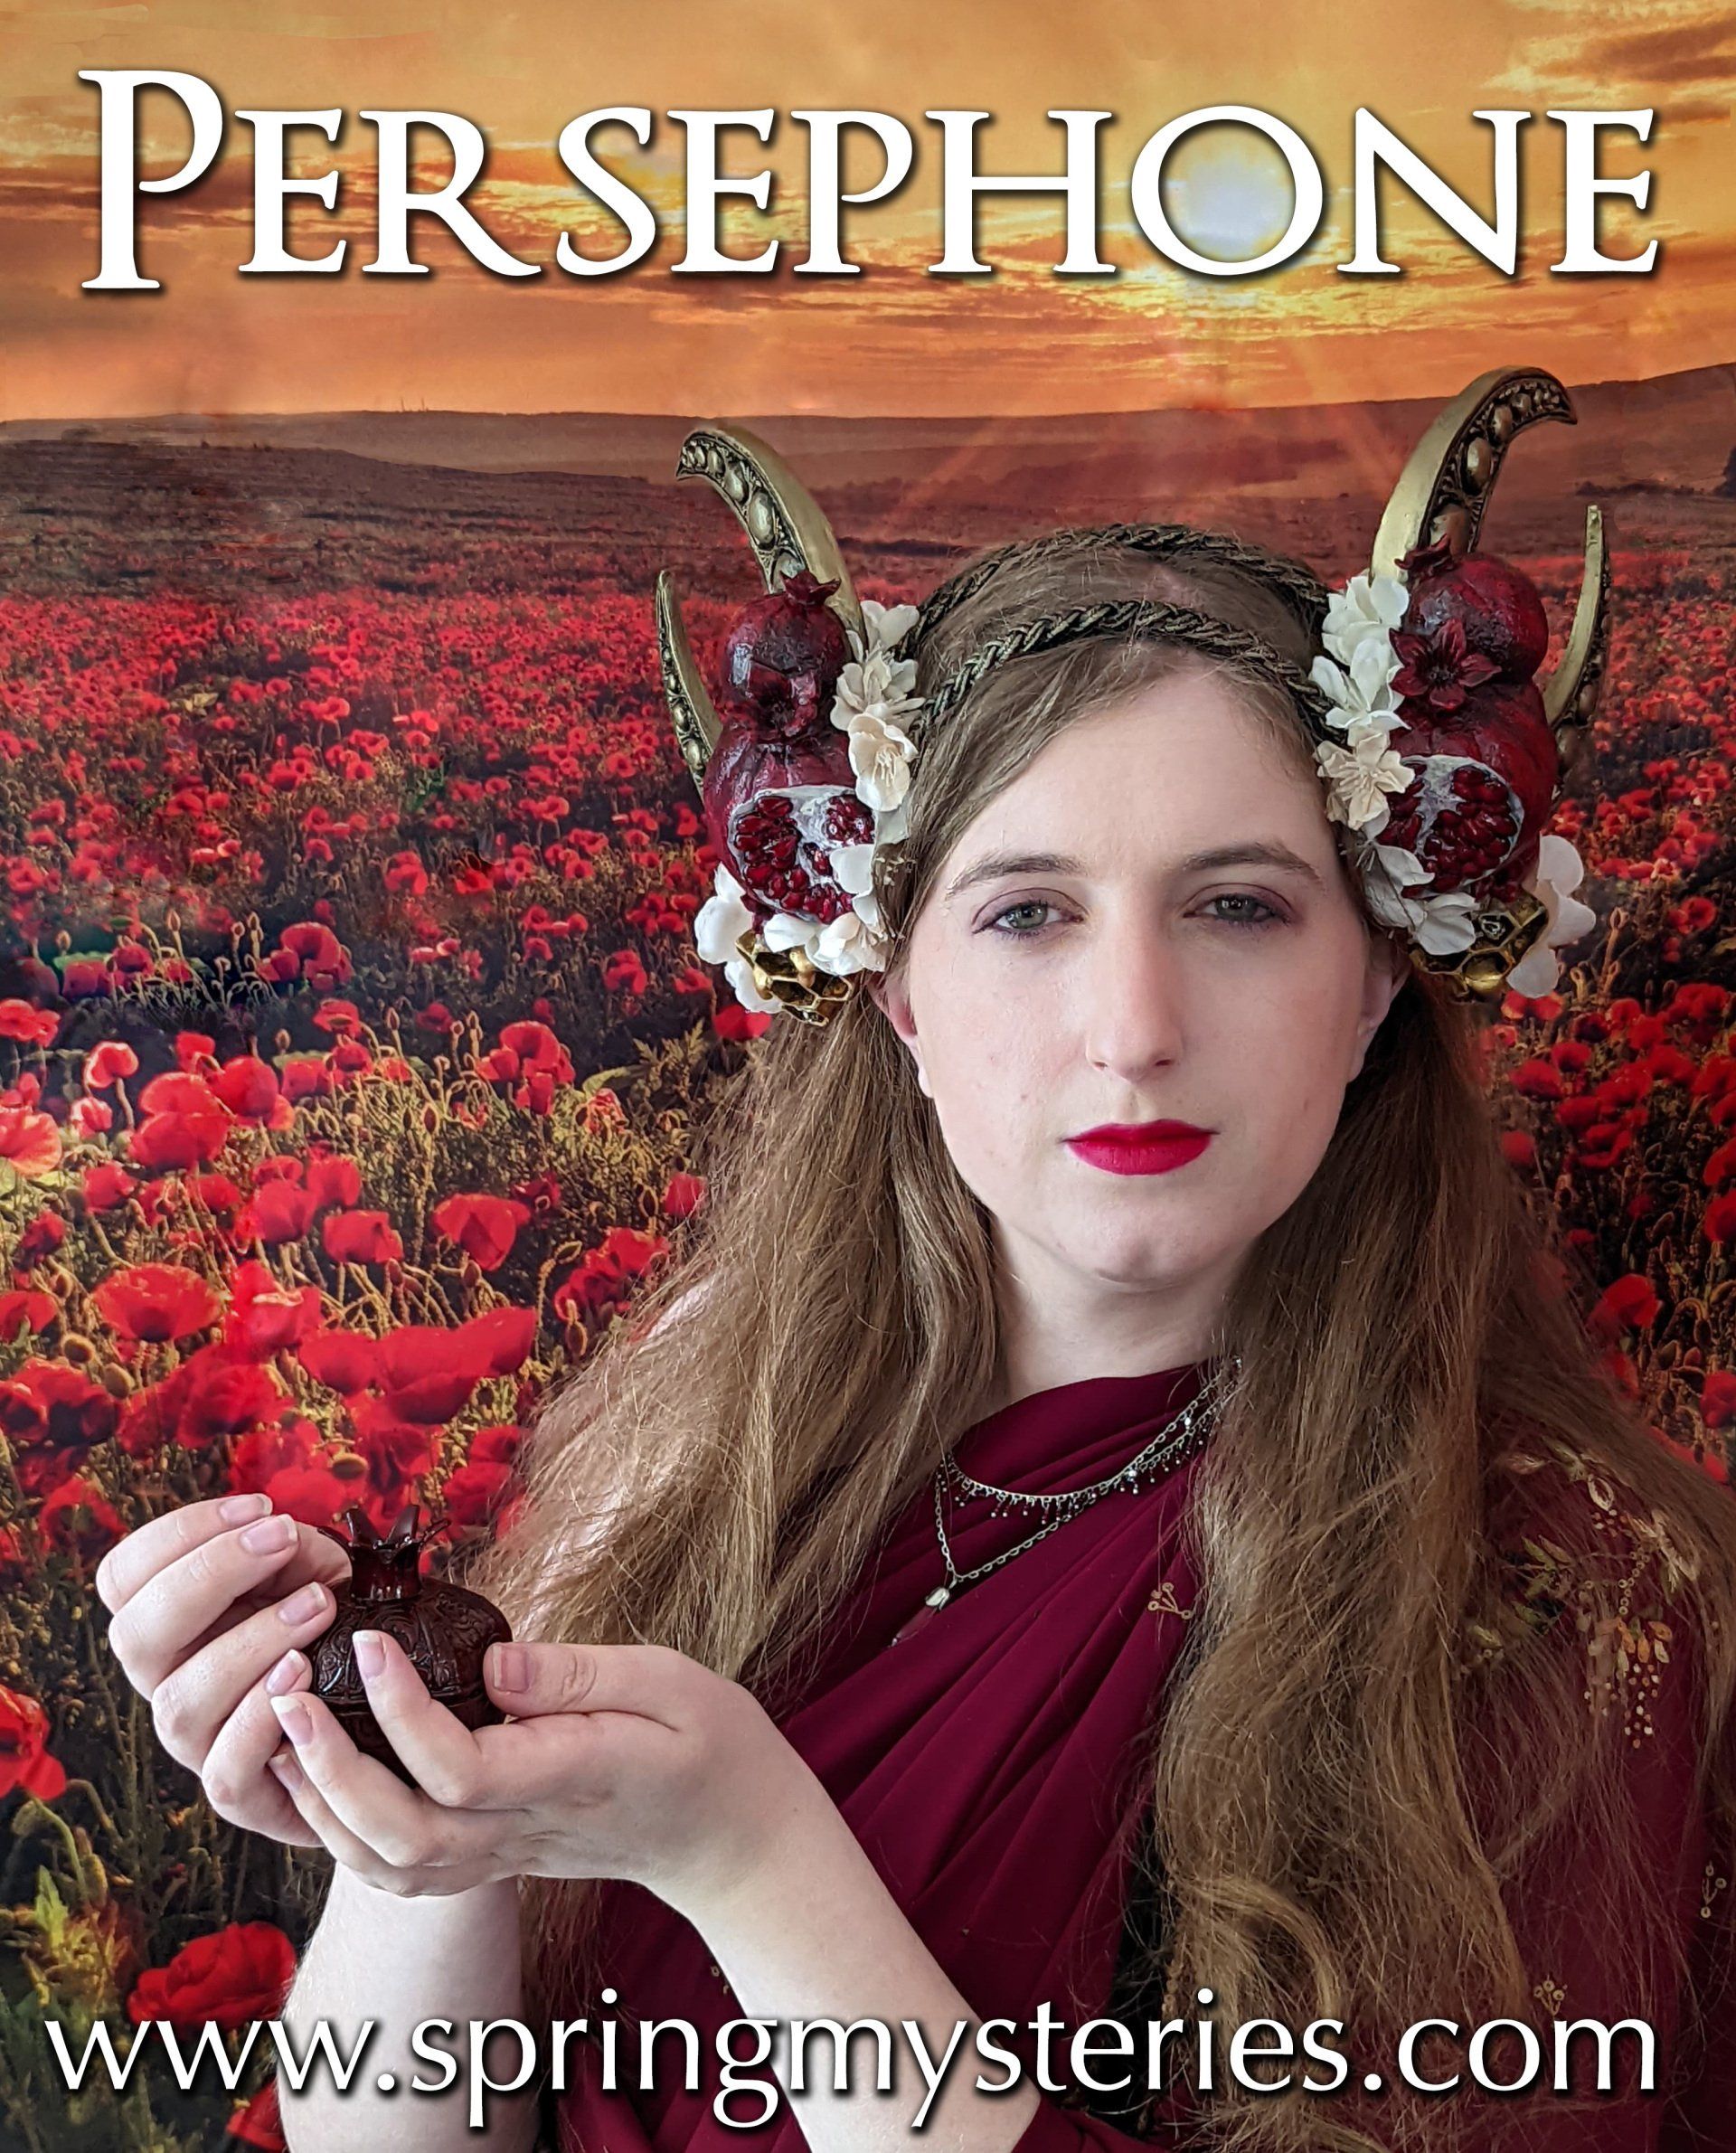 A woman is holding a pomegranate in front of a field of red flowers, representing Persephone.